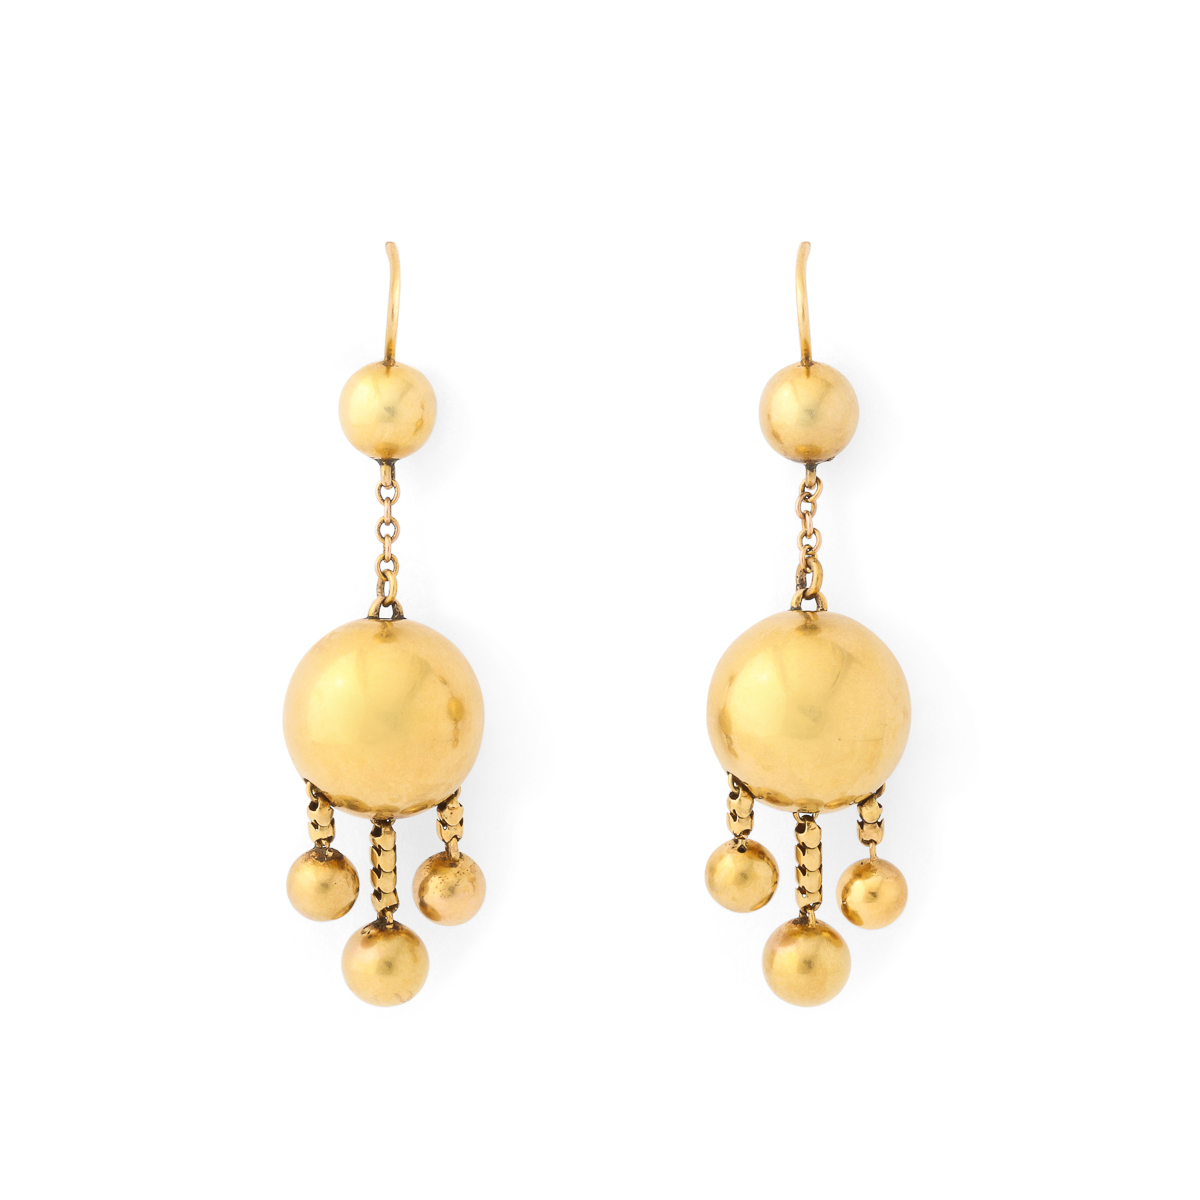 gold ball pendant earrings composed of one large gold ball suspending three smaller gold balls